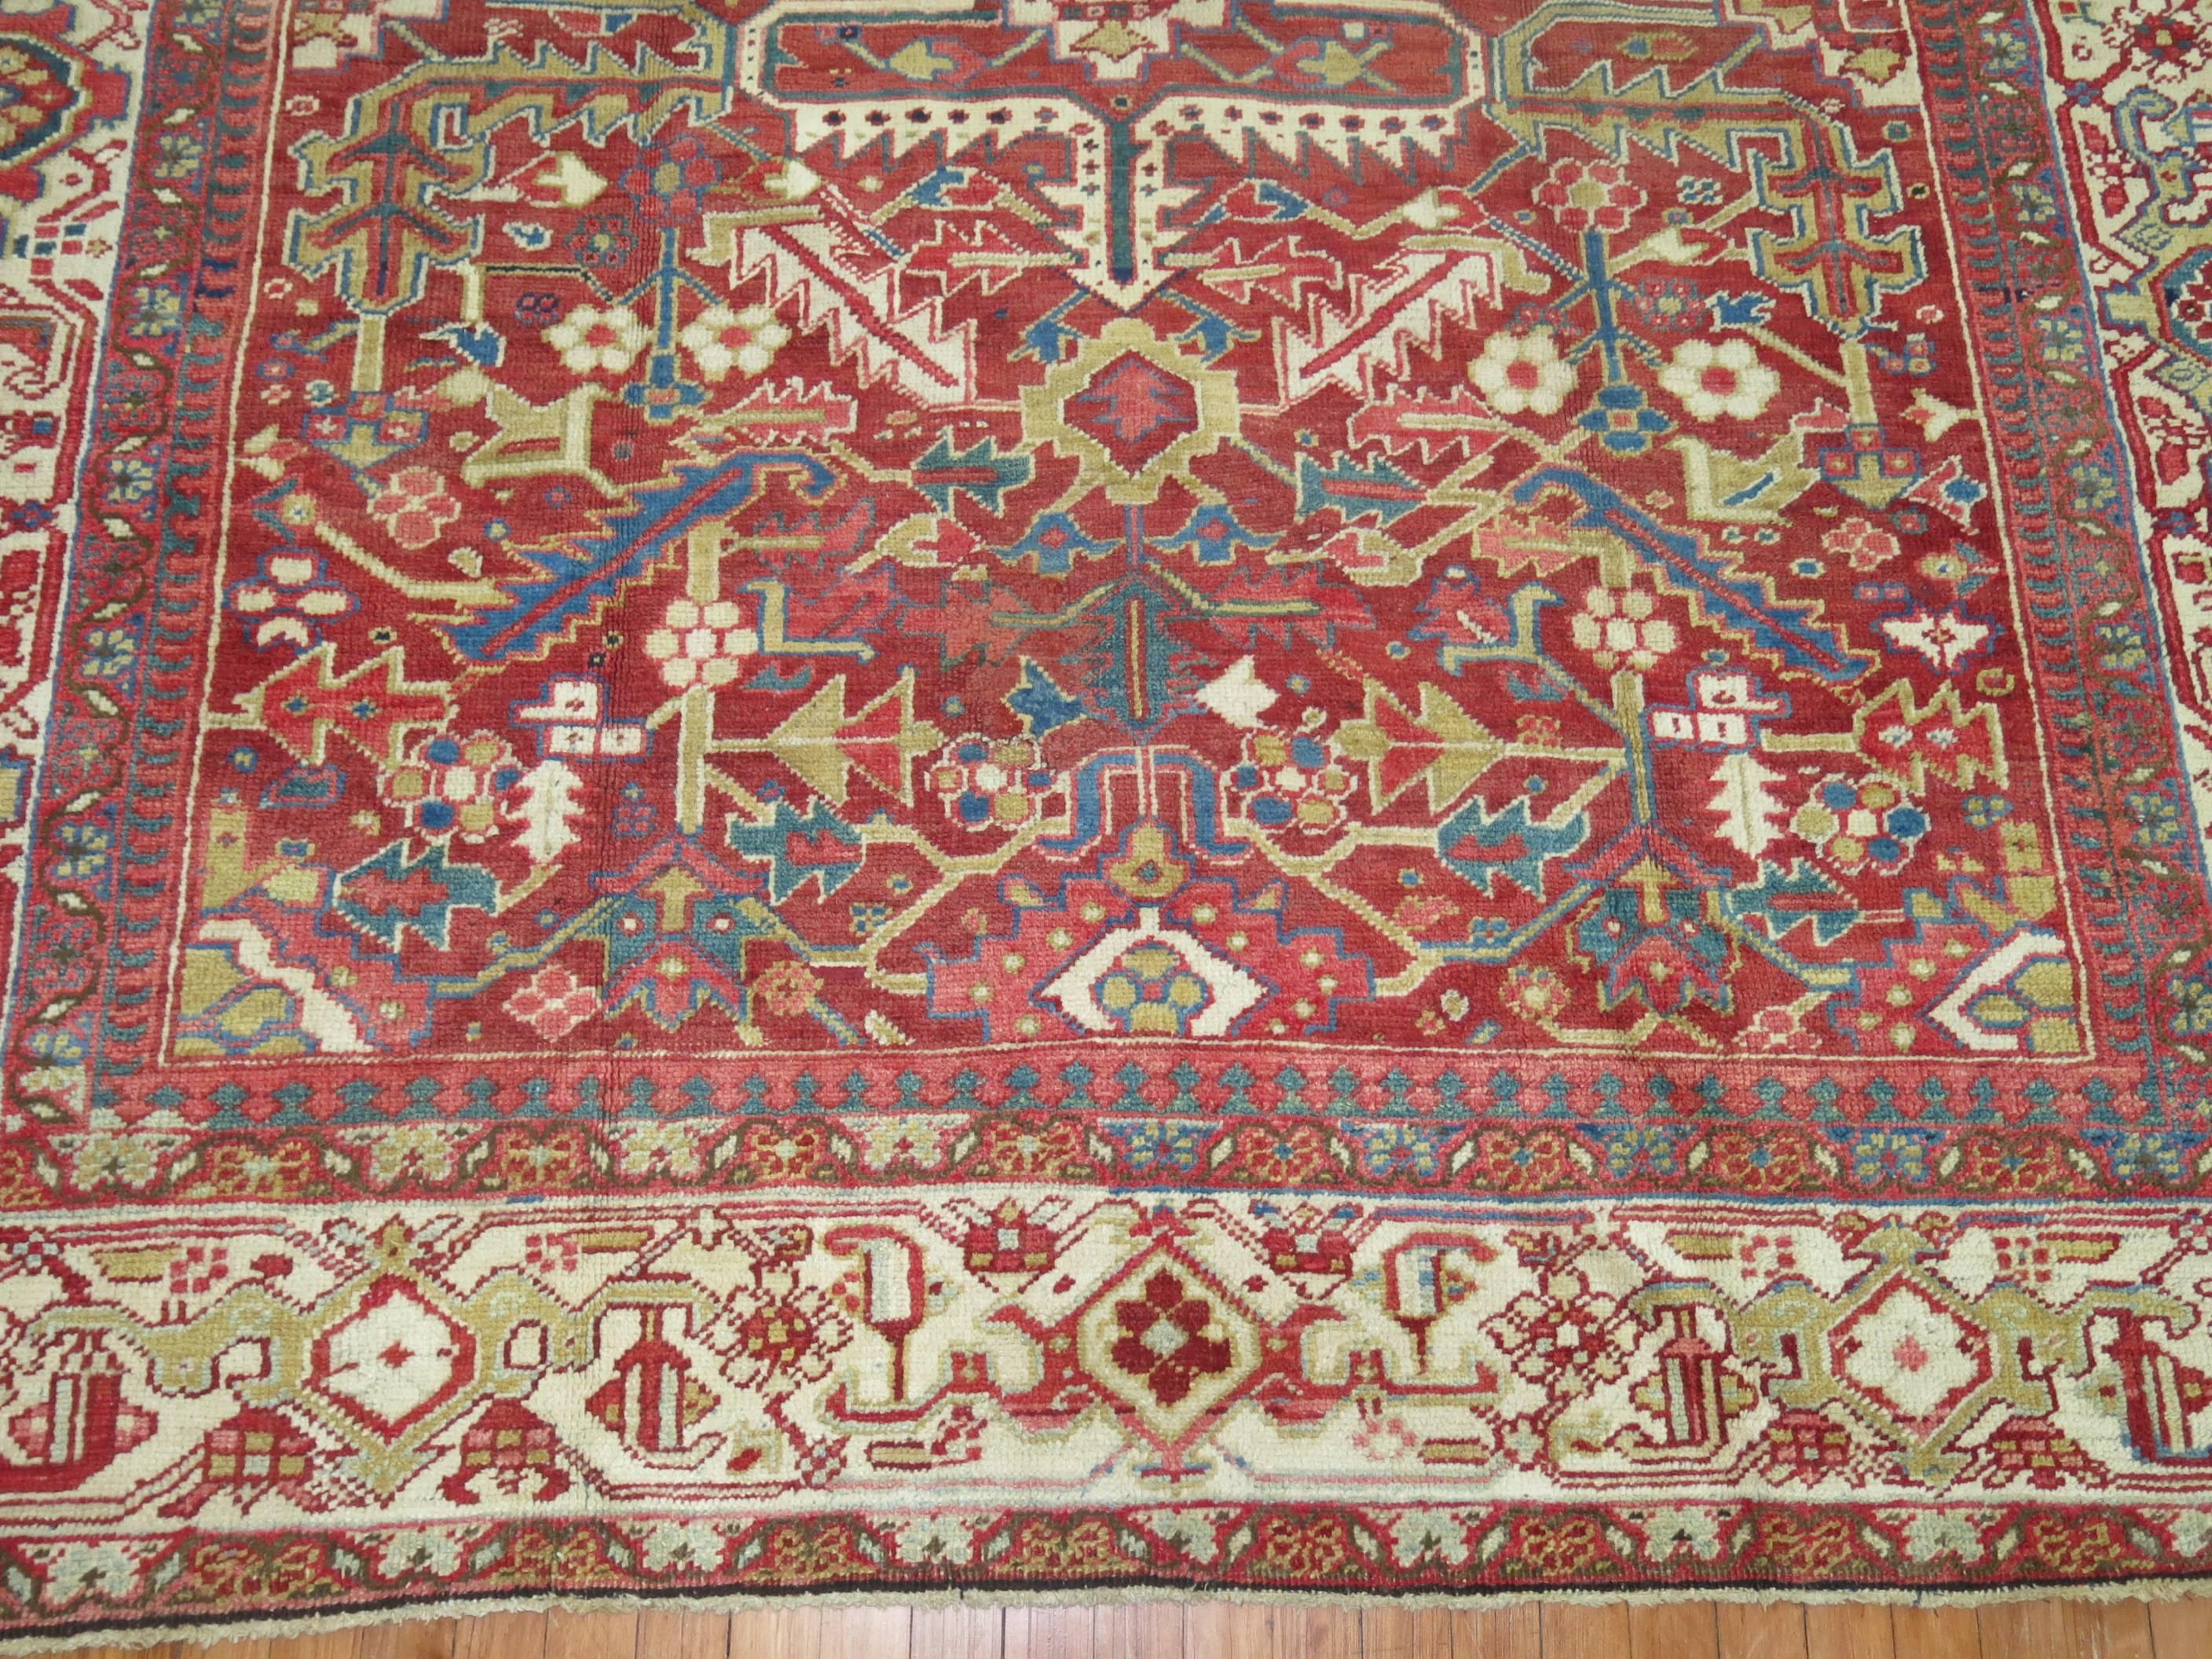 Hand-Woven Antique Square Persian Heriz Rug, Early 20th Century